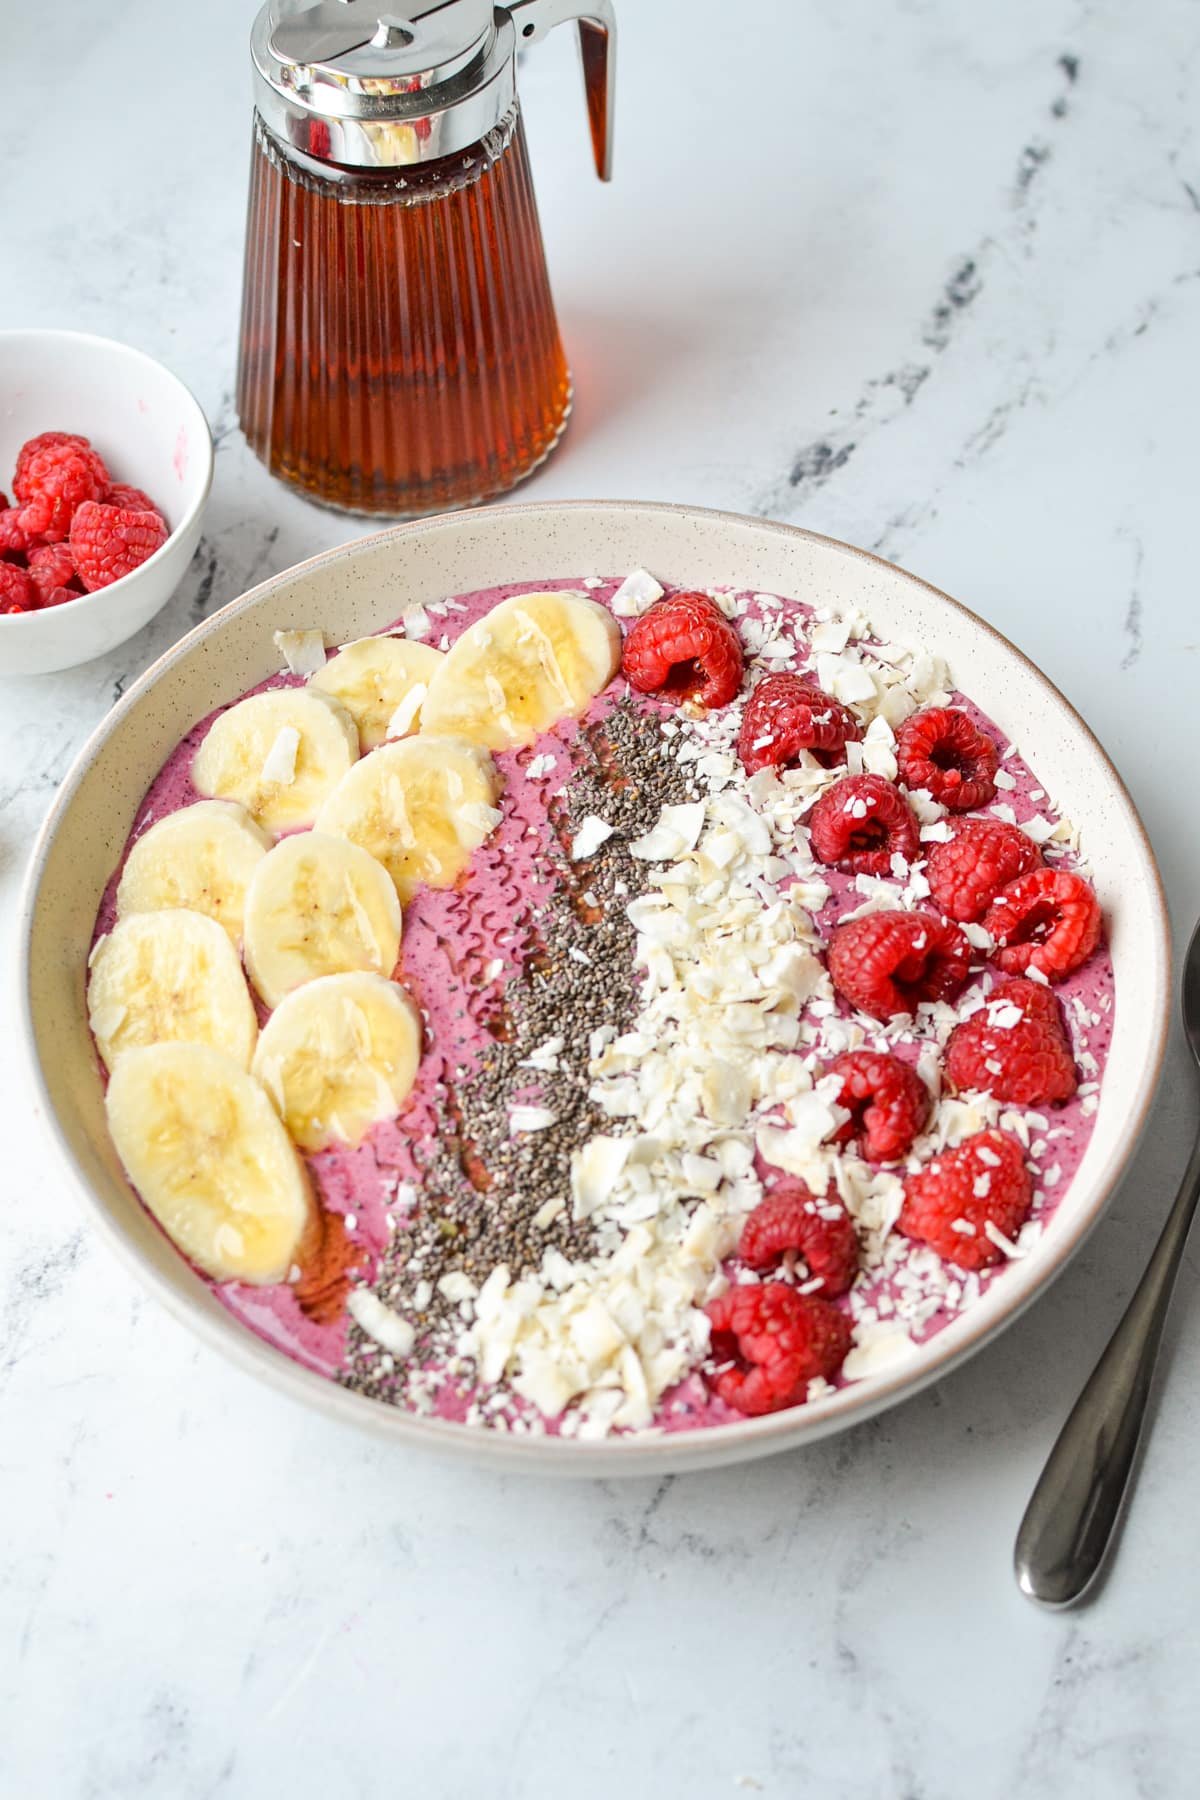 A smoothie bowl topped with banana, chia, coconut, and raspberries.